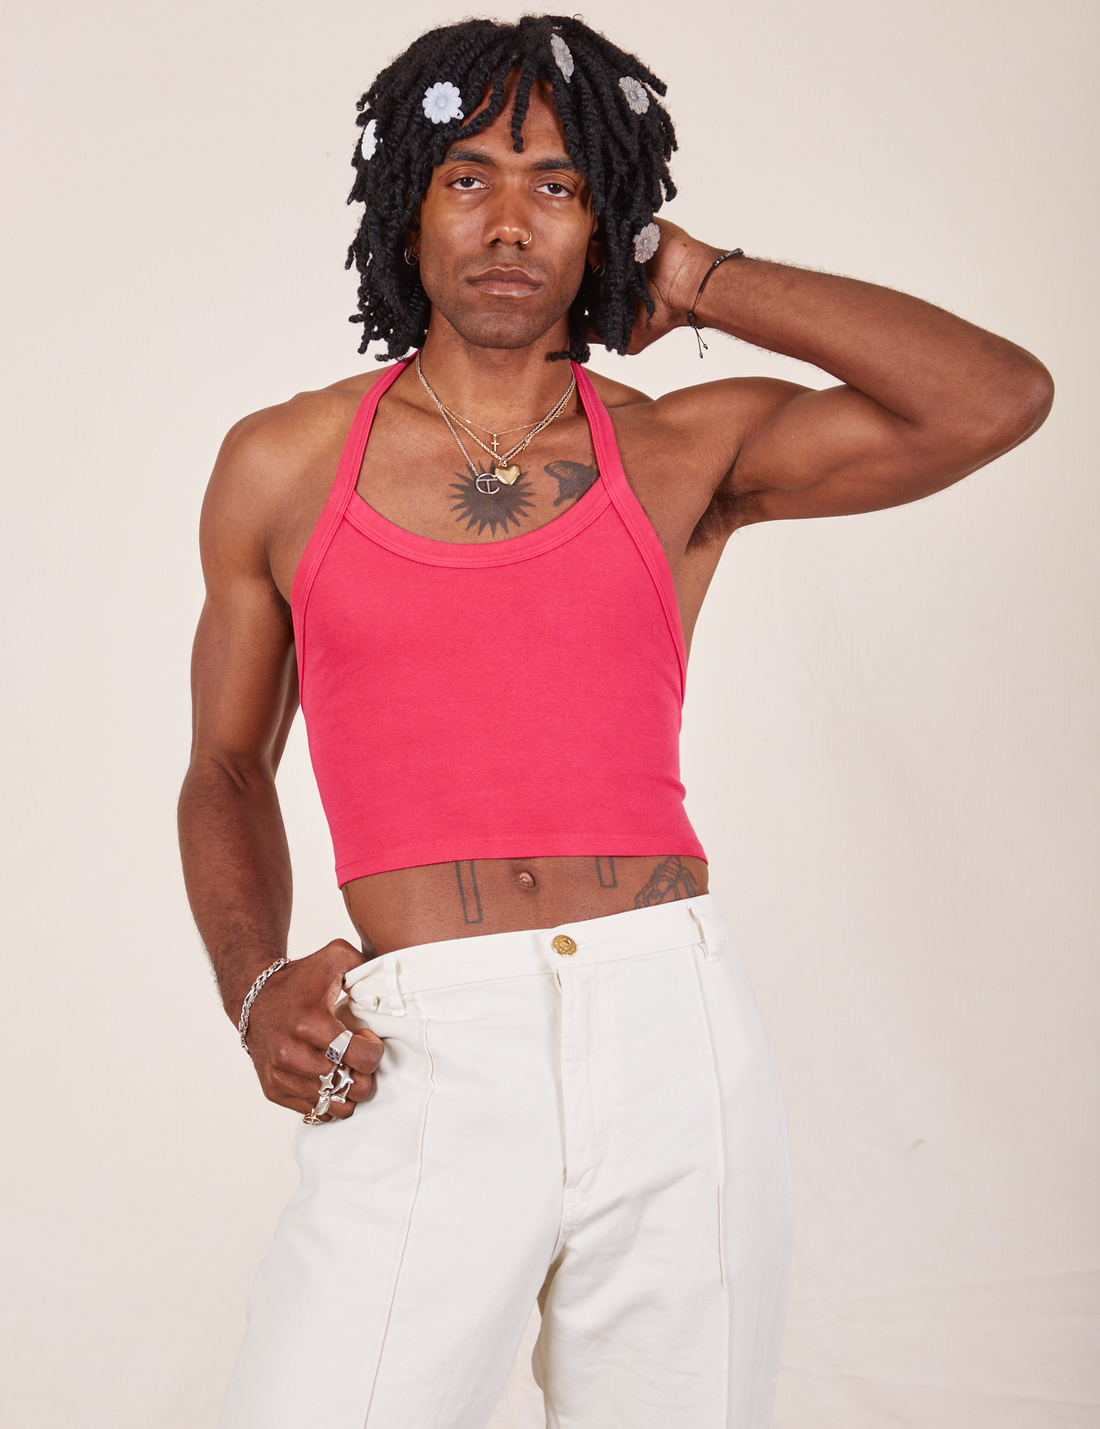 Jerrod is 6'3" and wearing XS Halter Top in Hot Pink paired with vintage off-white Western Pants